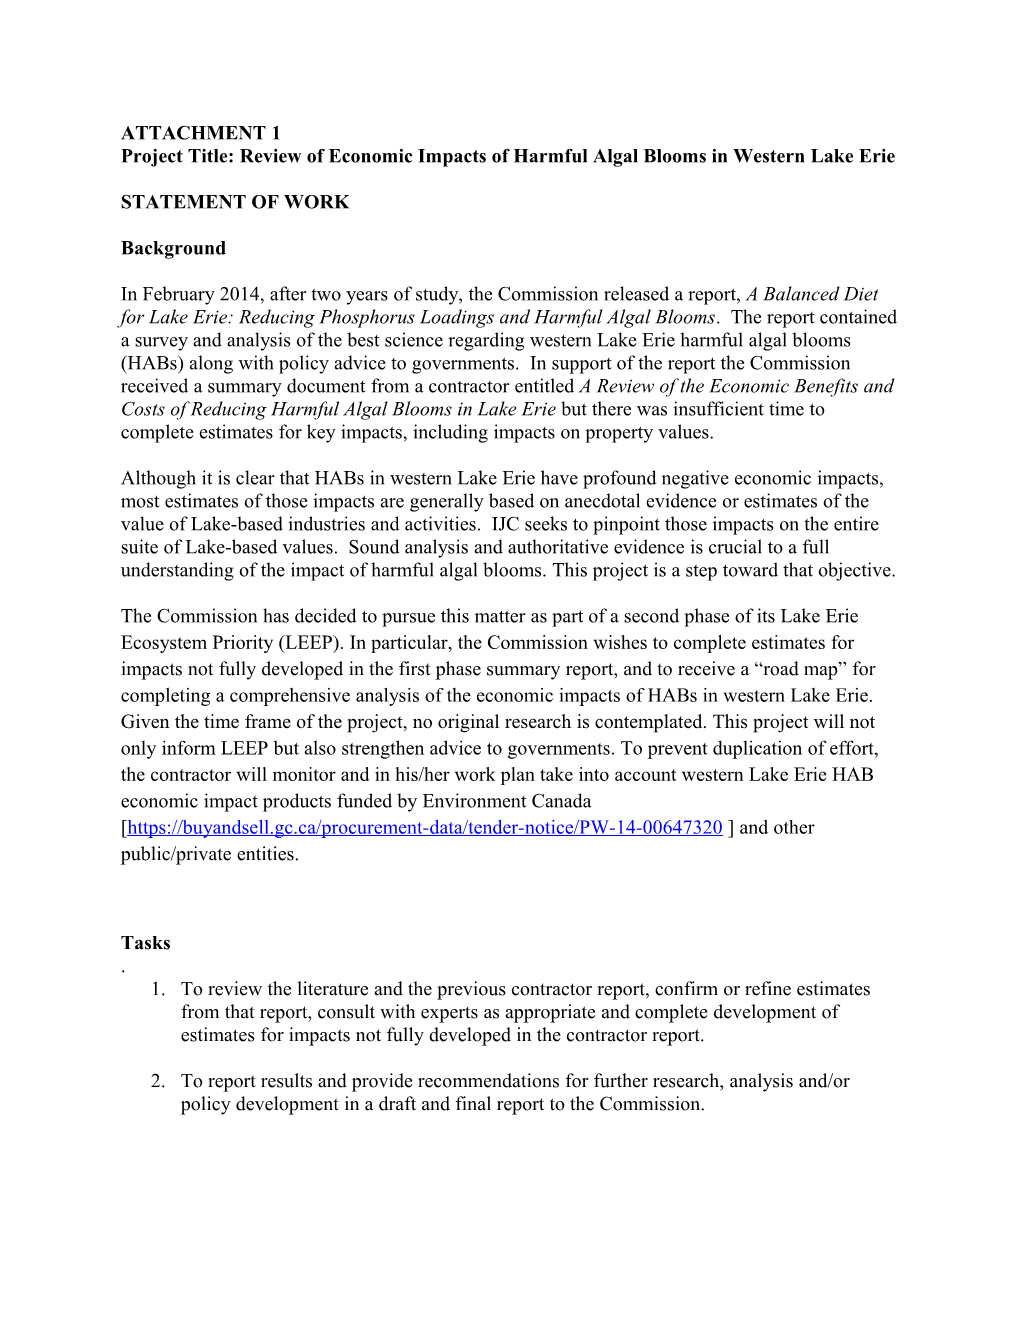 Project Title: Review of Economic Impacts of Harmful Algal Blooms in Western Lake Erie